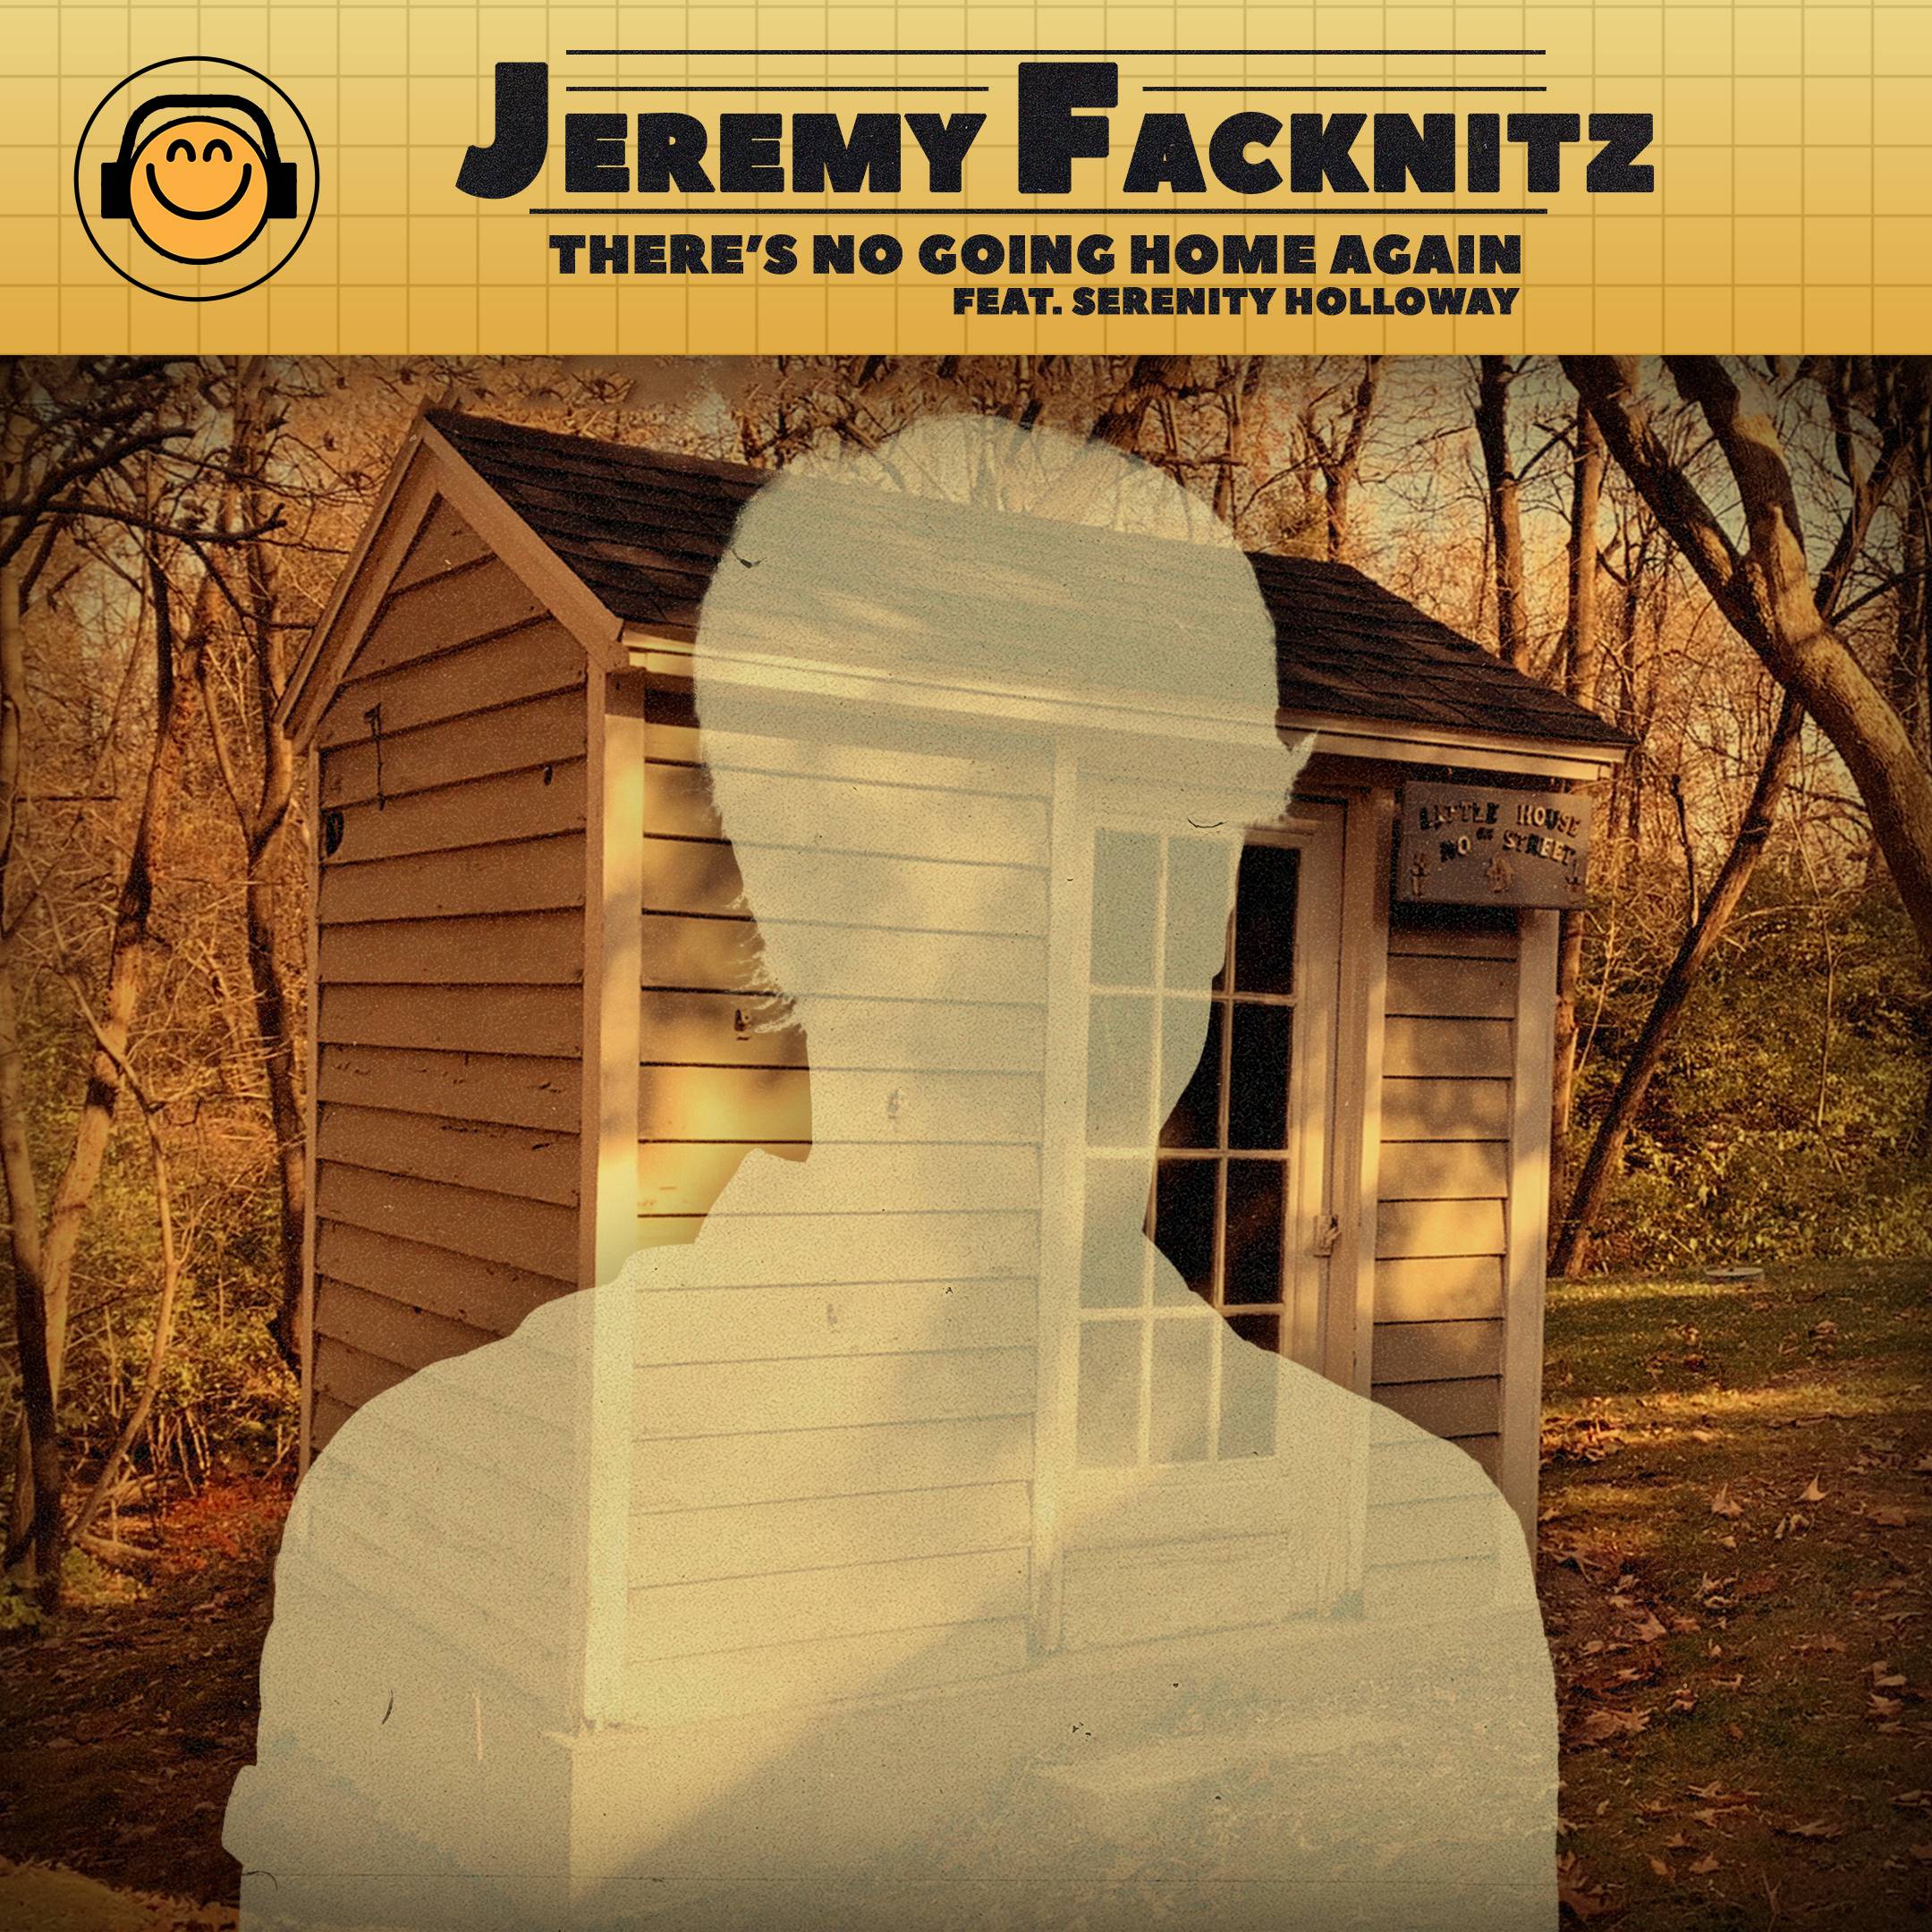 Artwork for the single “There’s No Going Home Again” (feat. Serenity Holloway) by Jeremy Facknitz